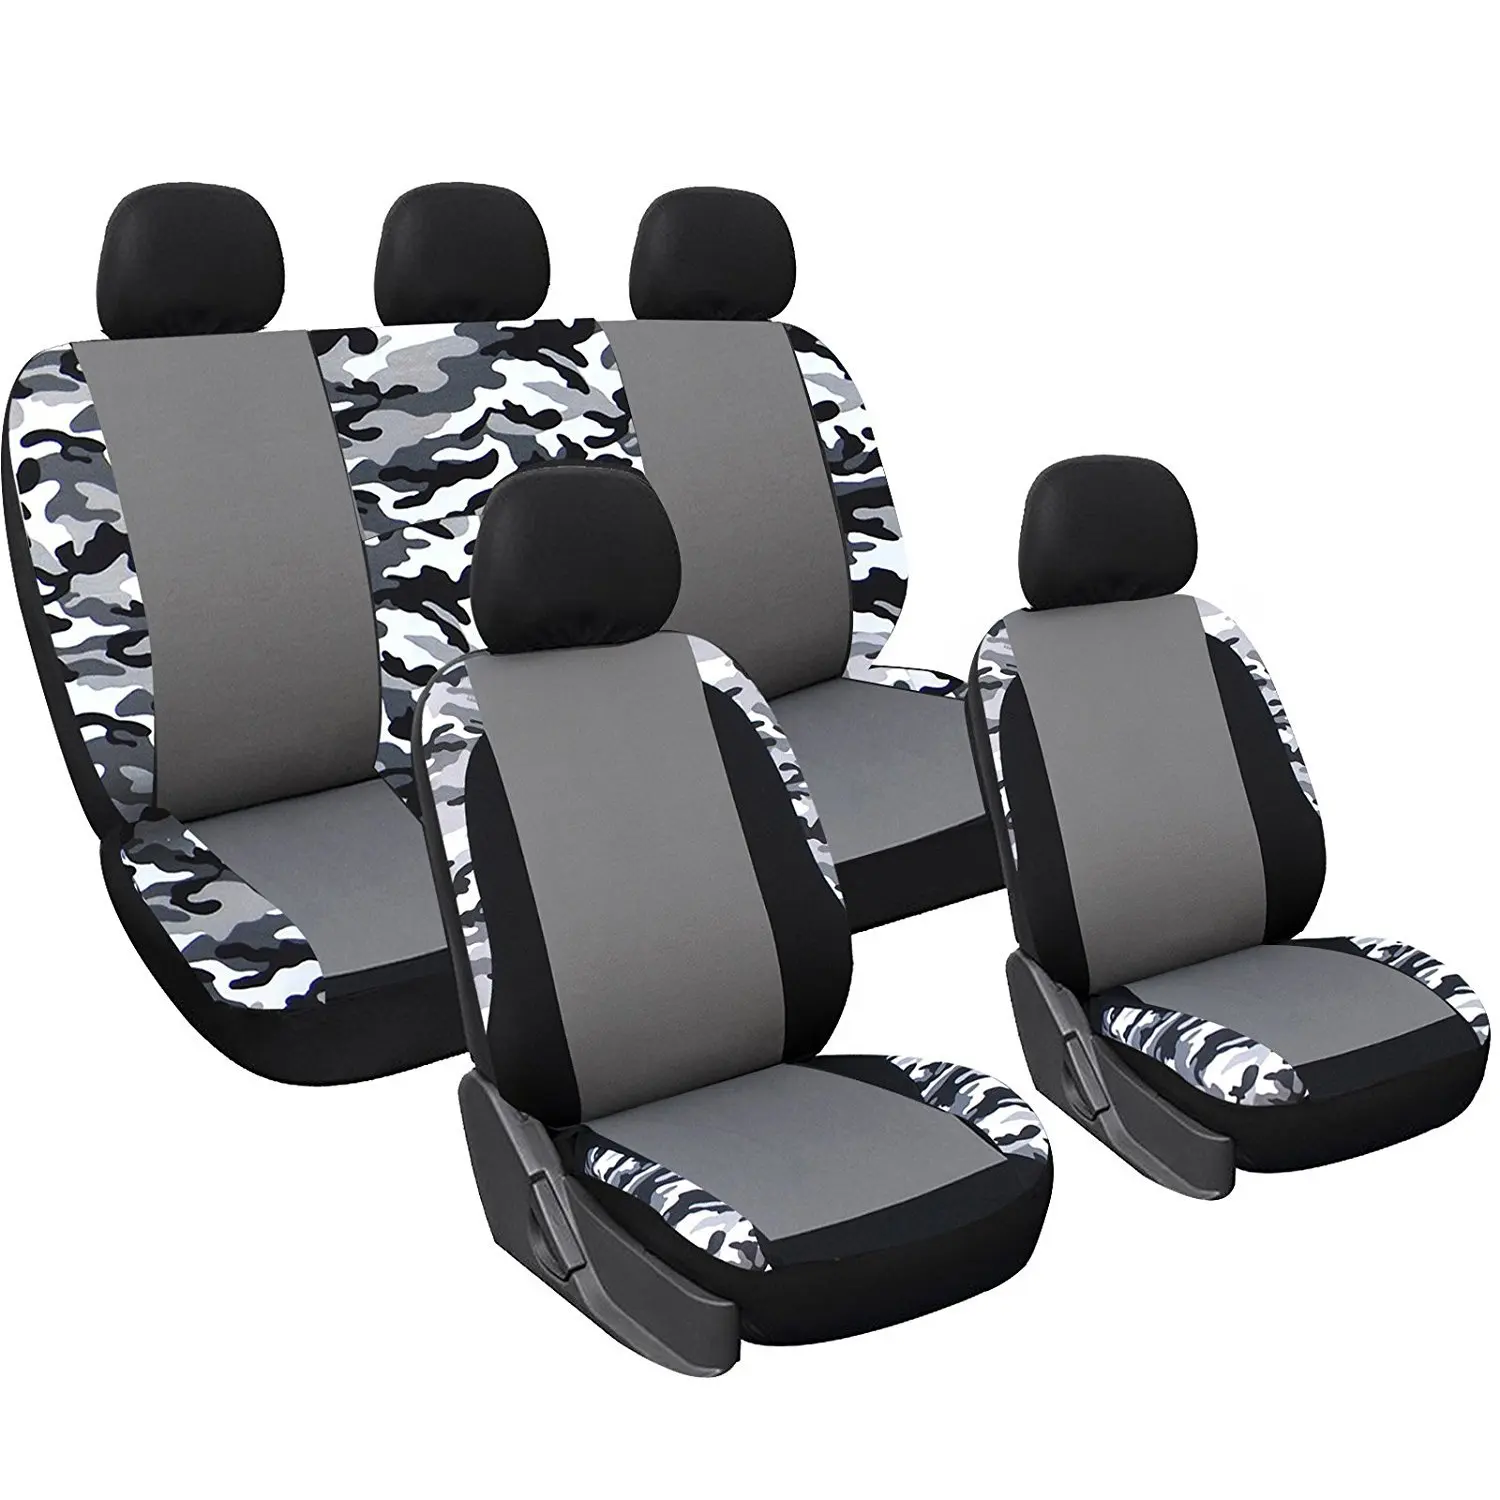 

Foreign Trade Car Seat Cover for Cross Border Electricity Supplier Four Seasons Universal 5 Car Seat Camouflage Cushion EBay Ali